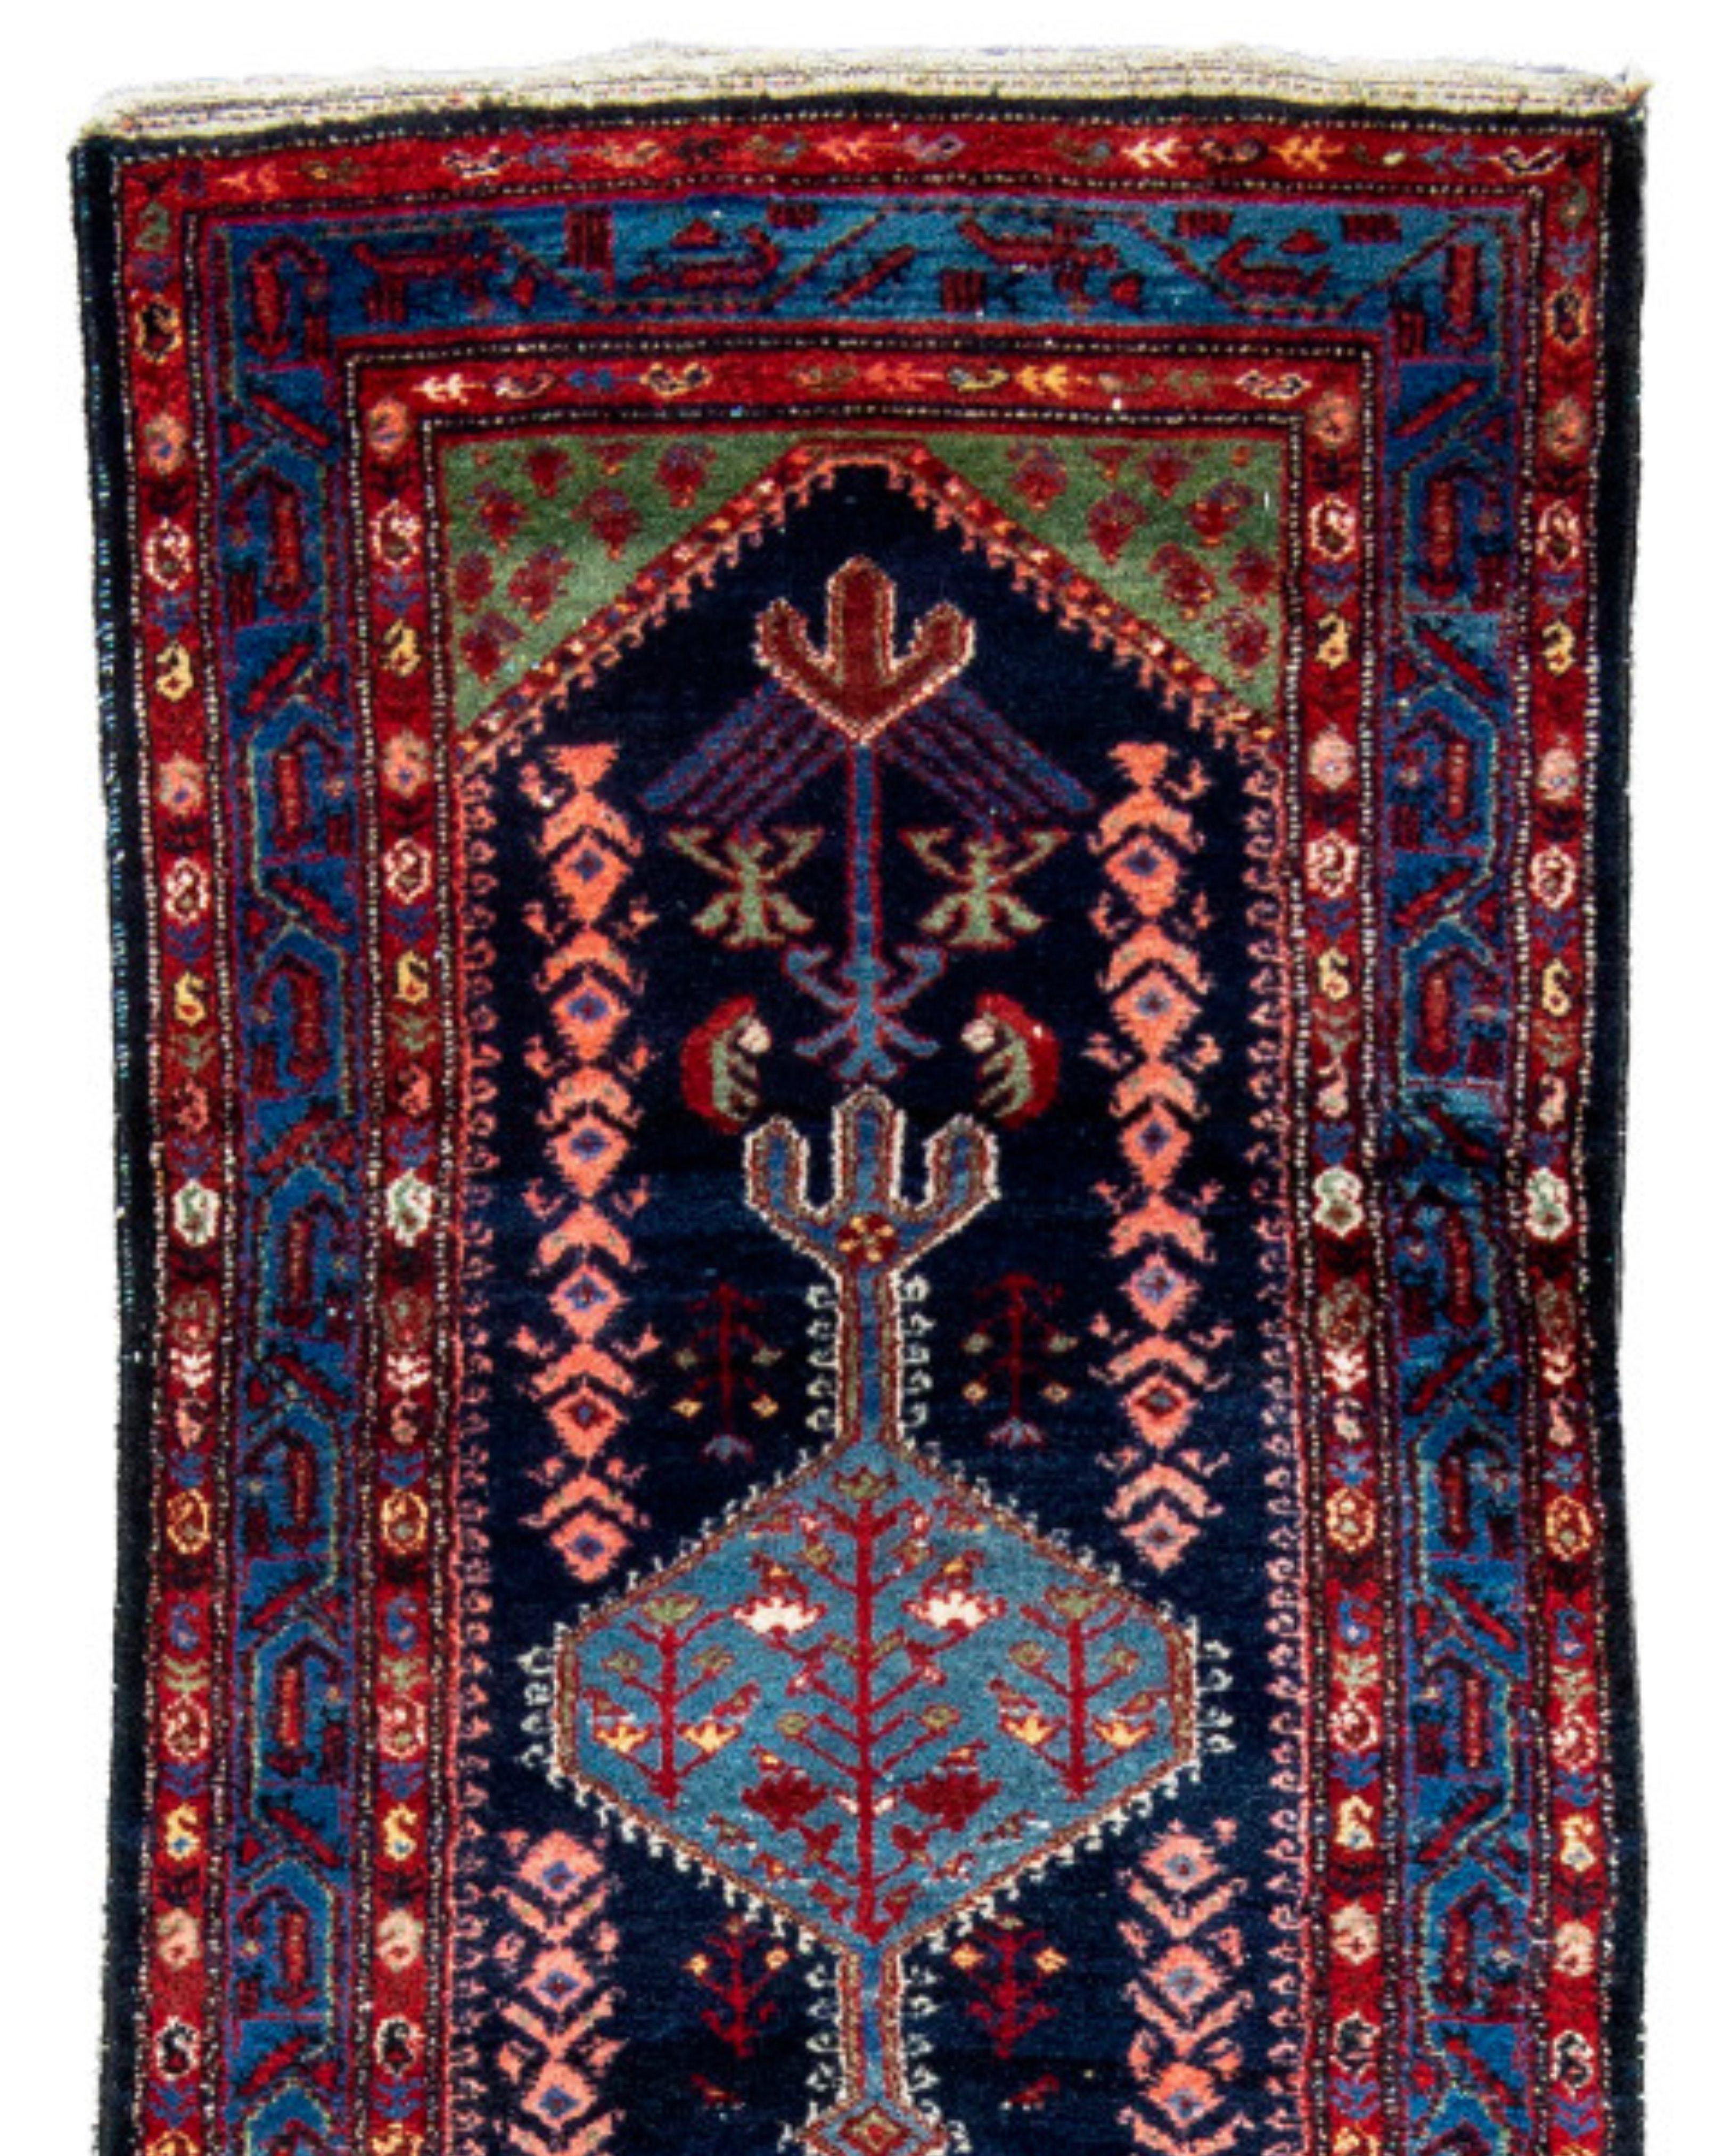 Antique Hamadan Narrow Runner Rug, Early 20th Century

Additional information:
Dimensions: 2'10